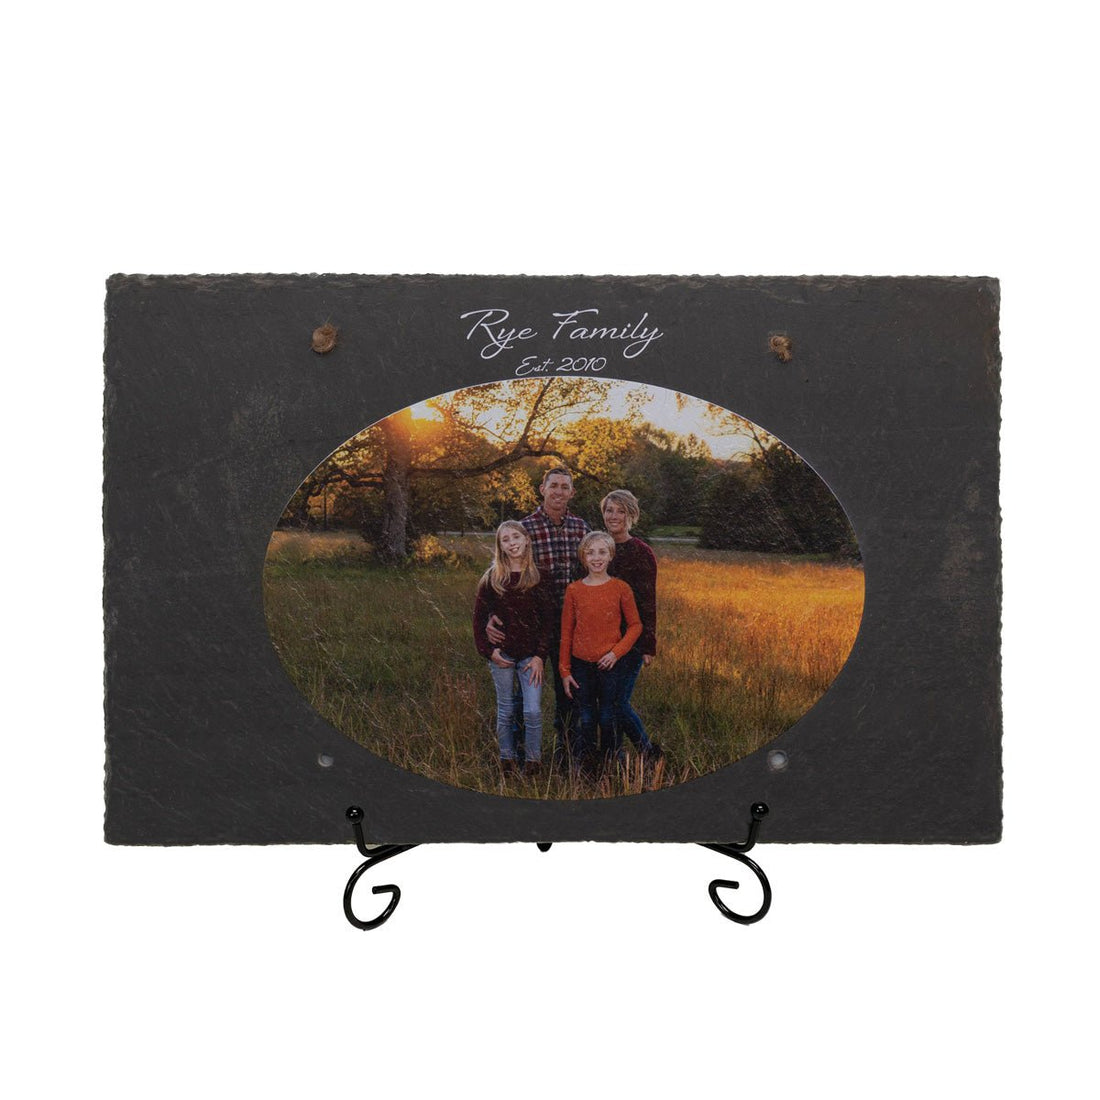 Personalized (Landscape Format) and Text on 9.75"x15.75" Beautiful Charcoal Slate